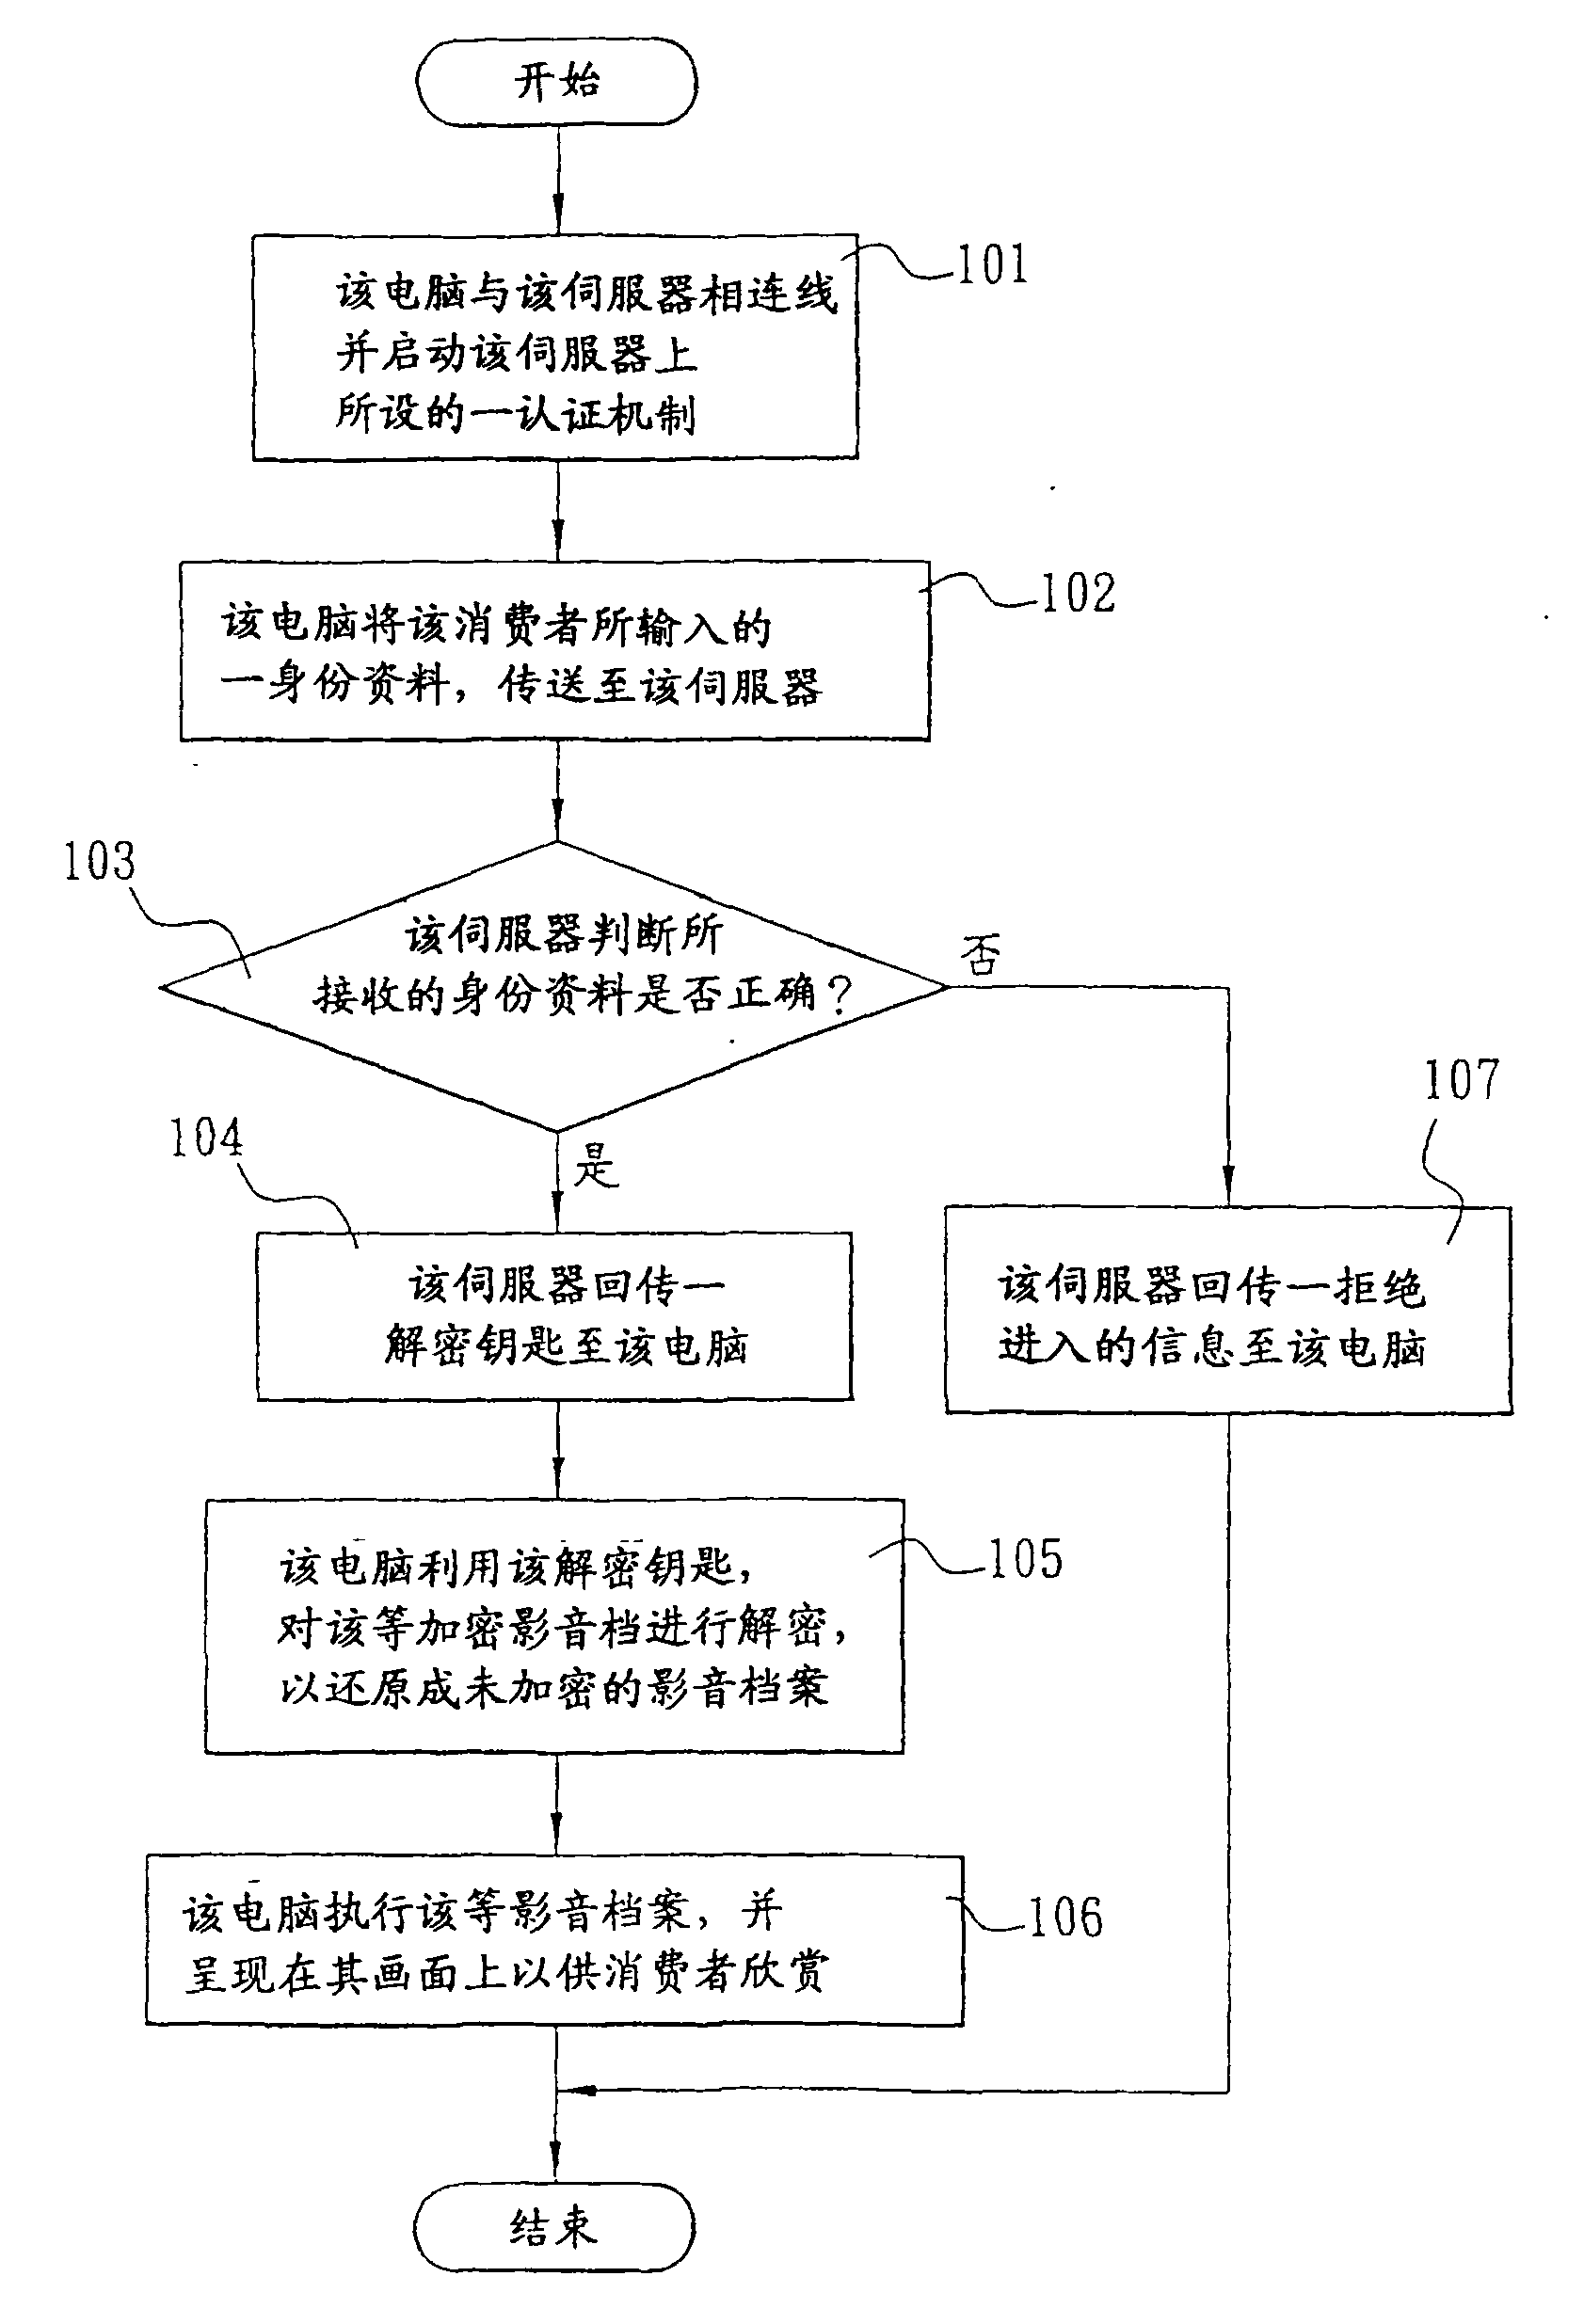 Authenmtication and control method for video-audio multimedium information